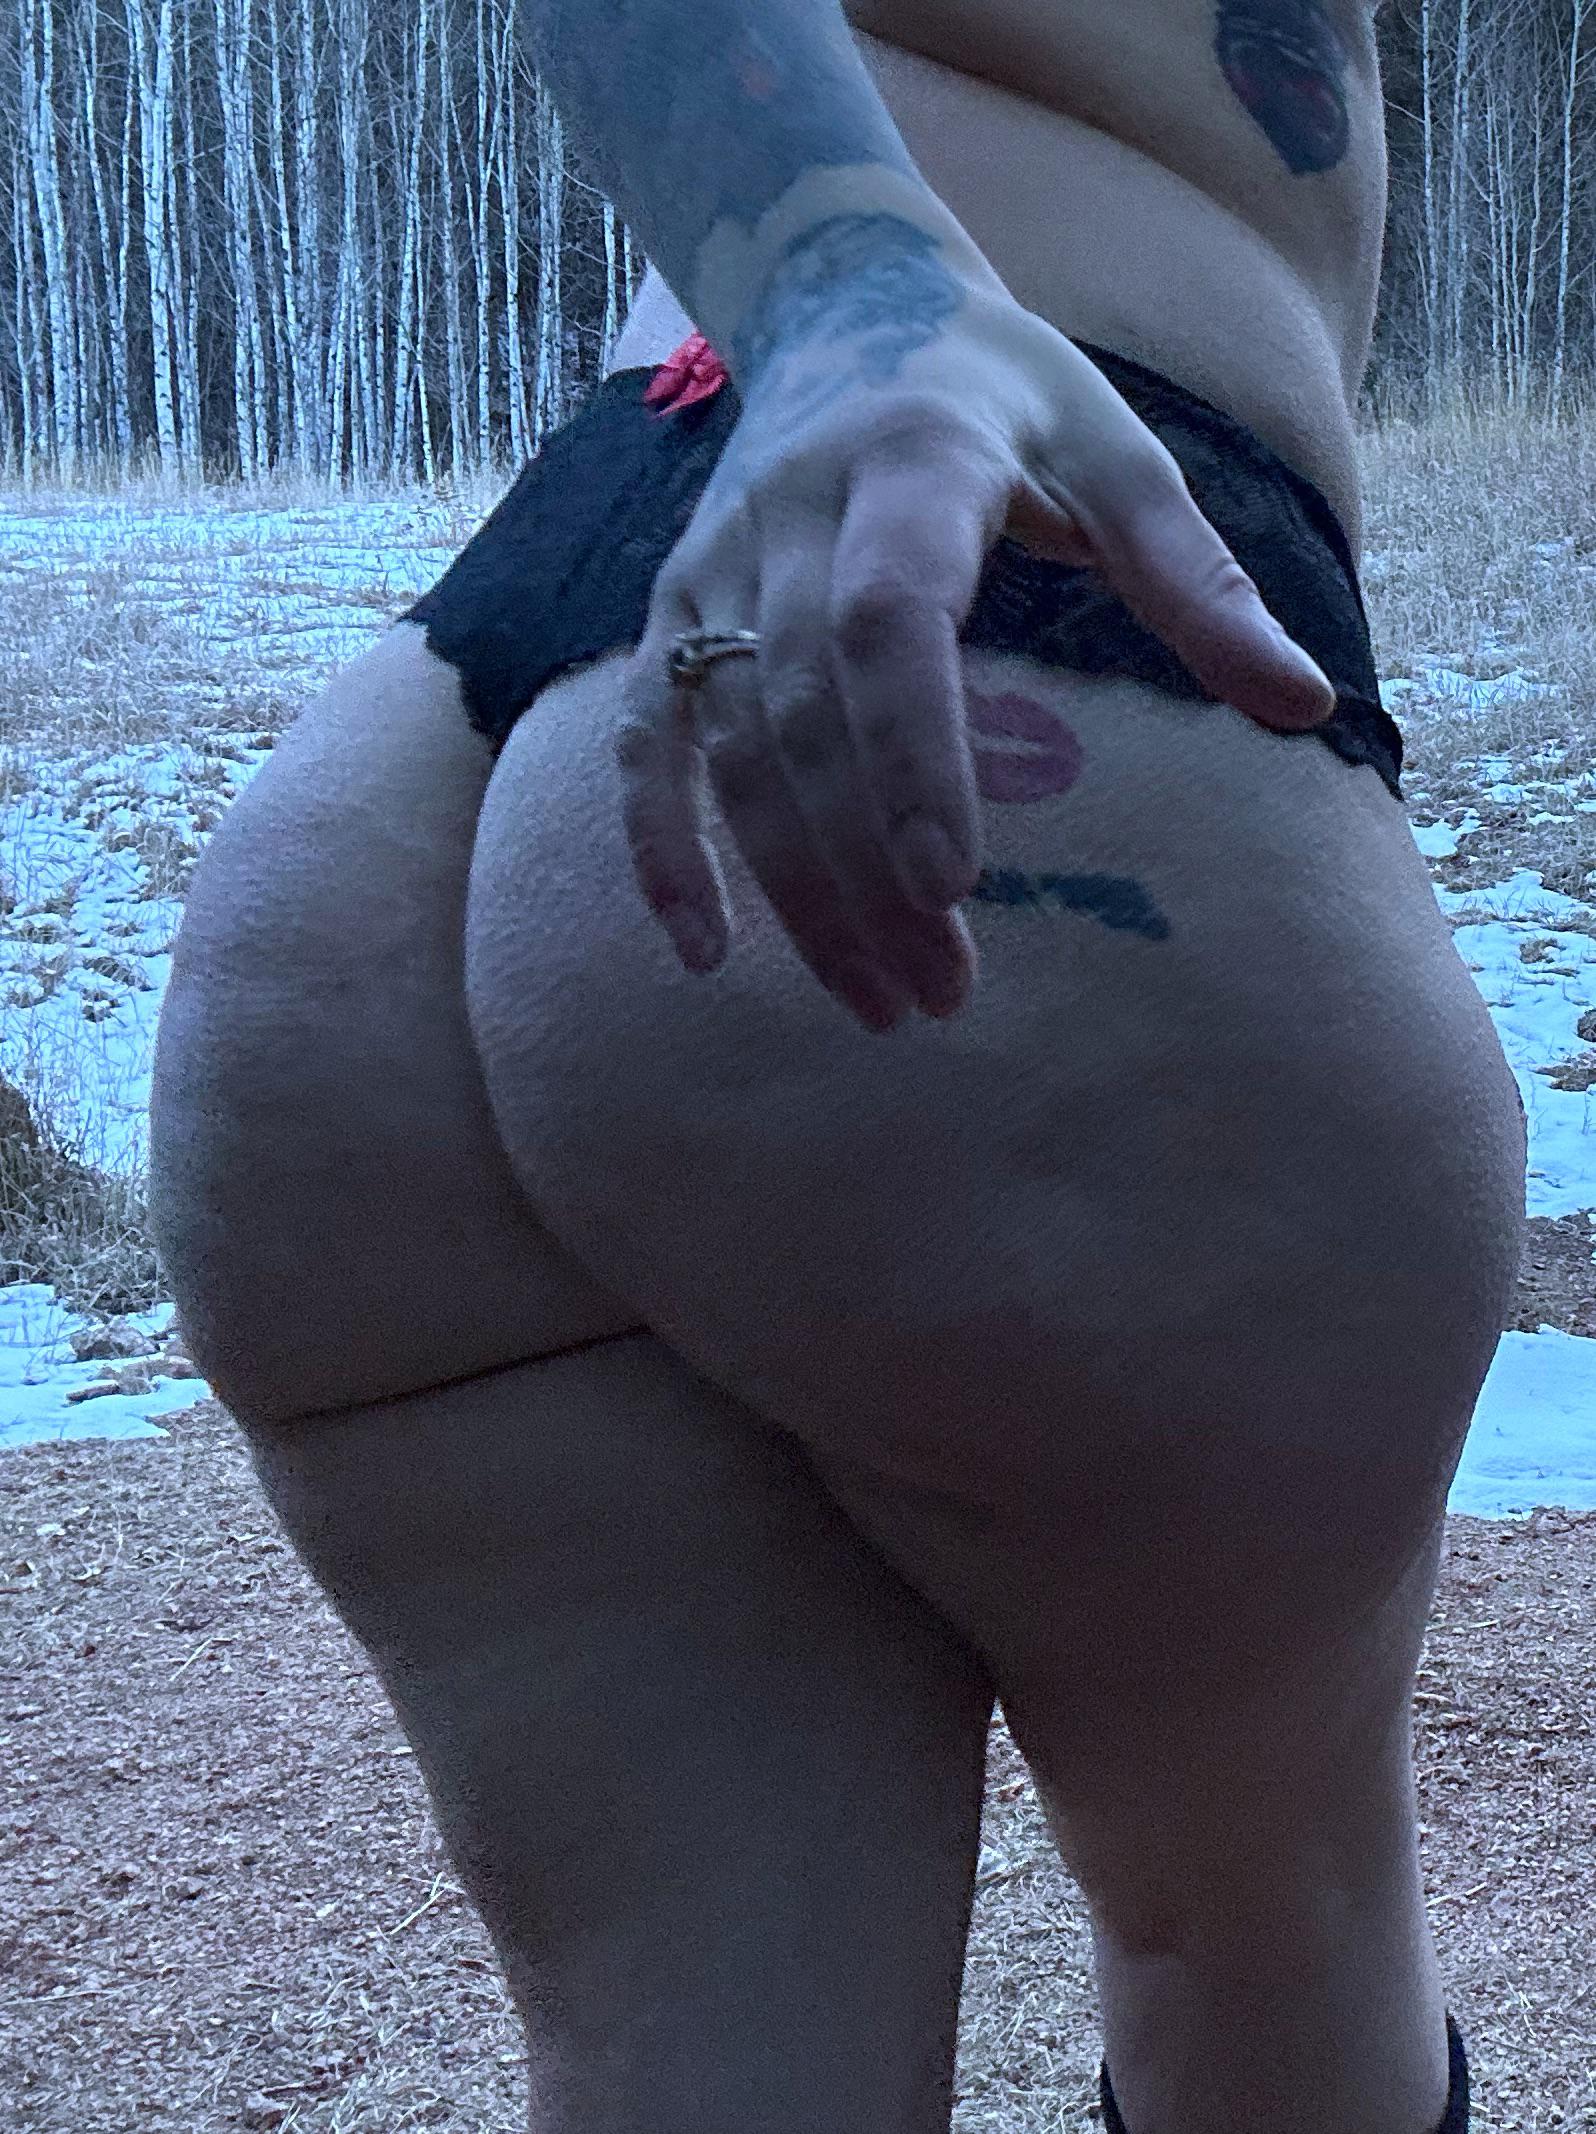 PAWG I hope that yall enjoy this outtake of my